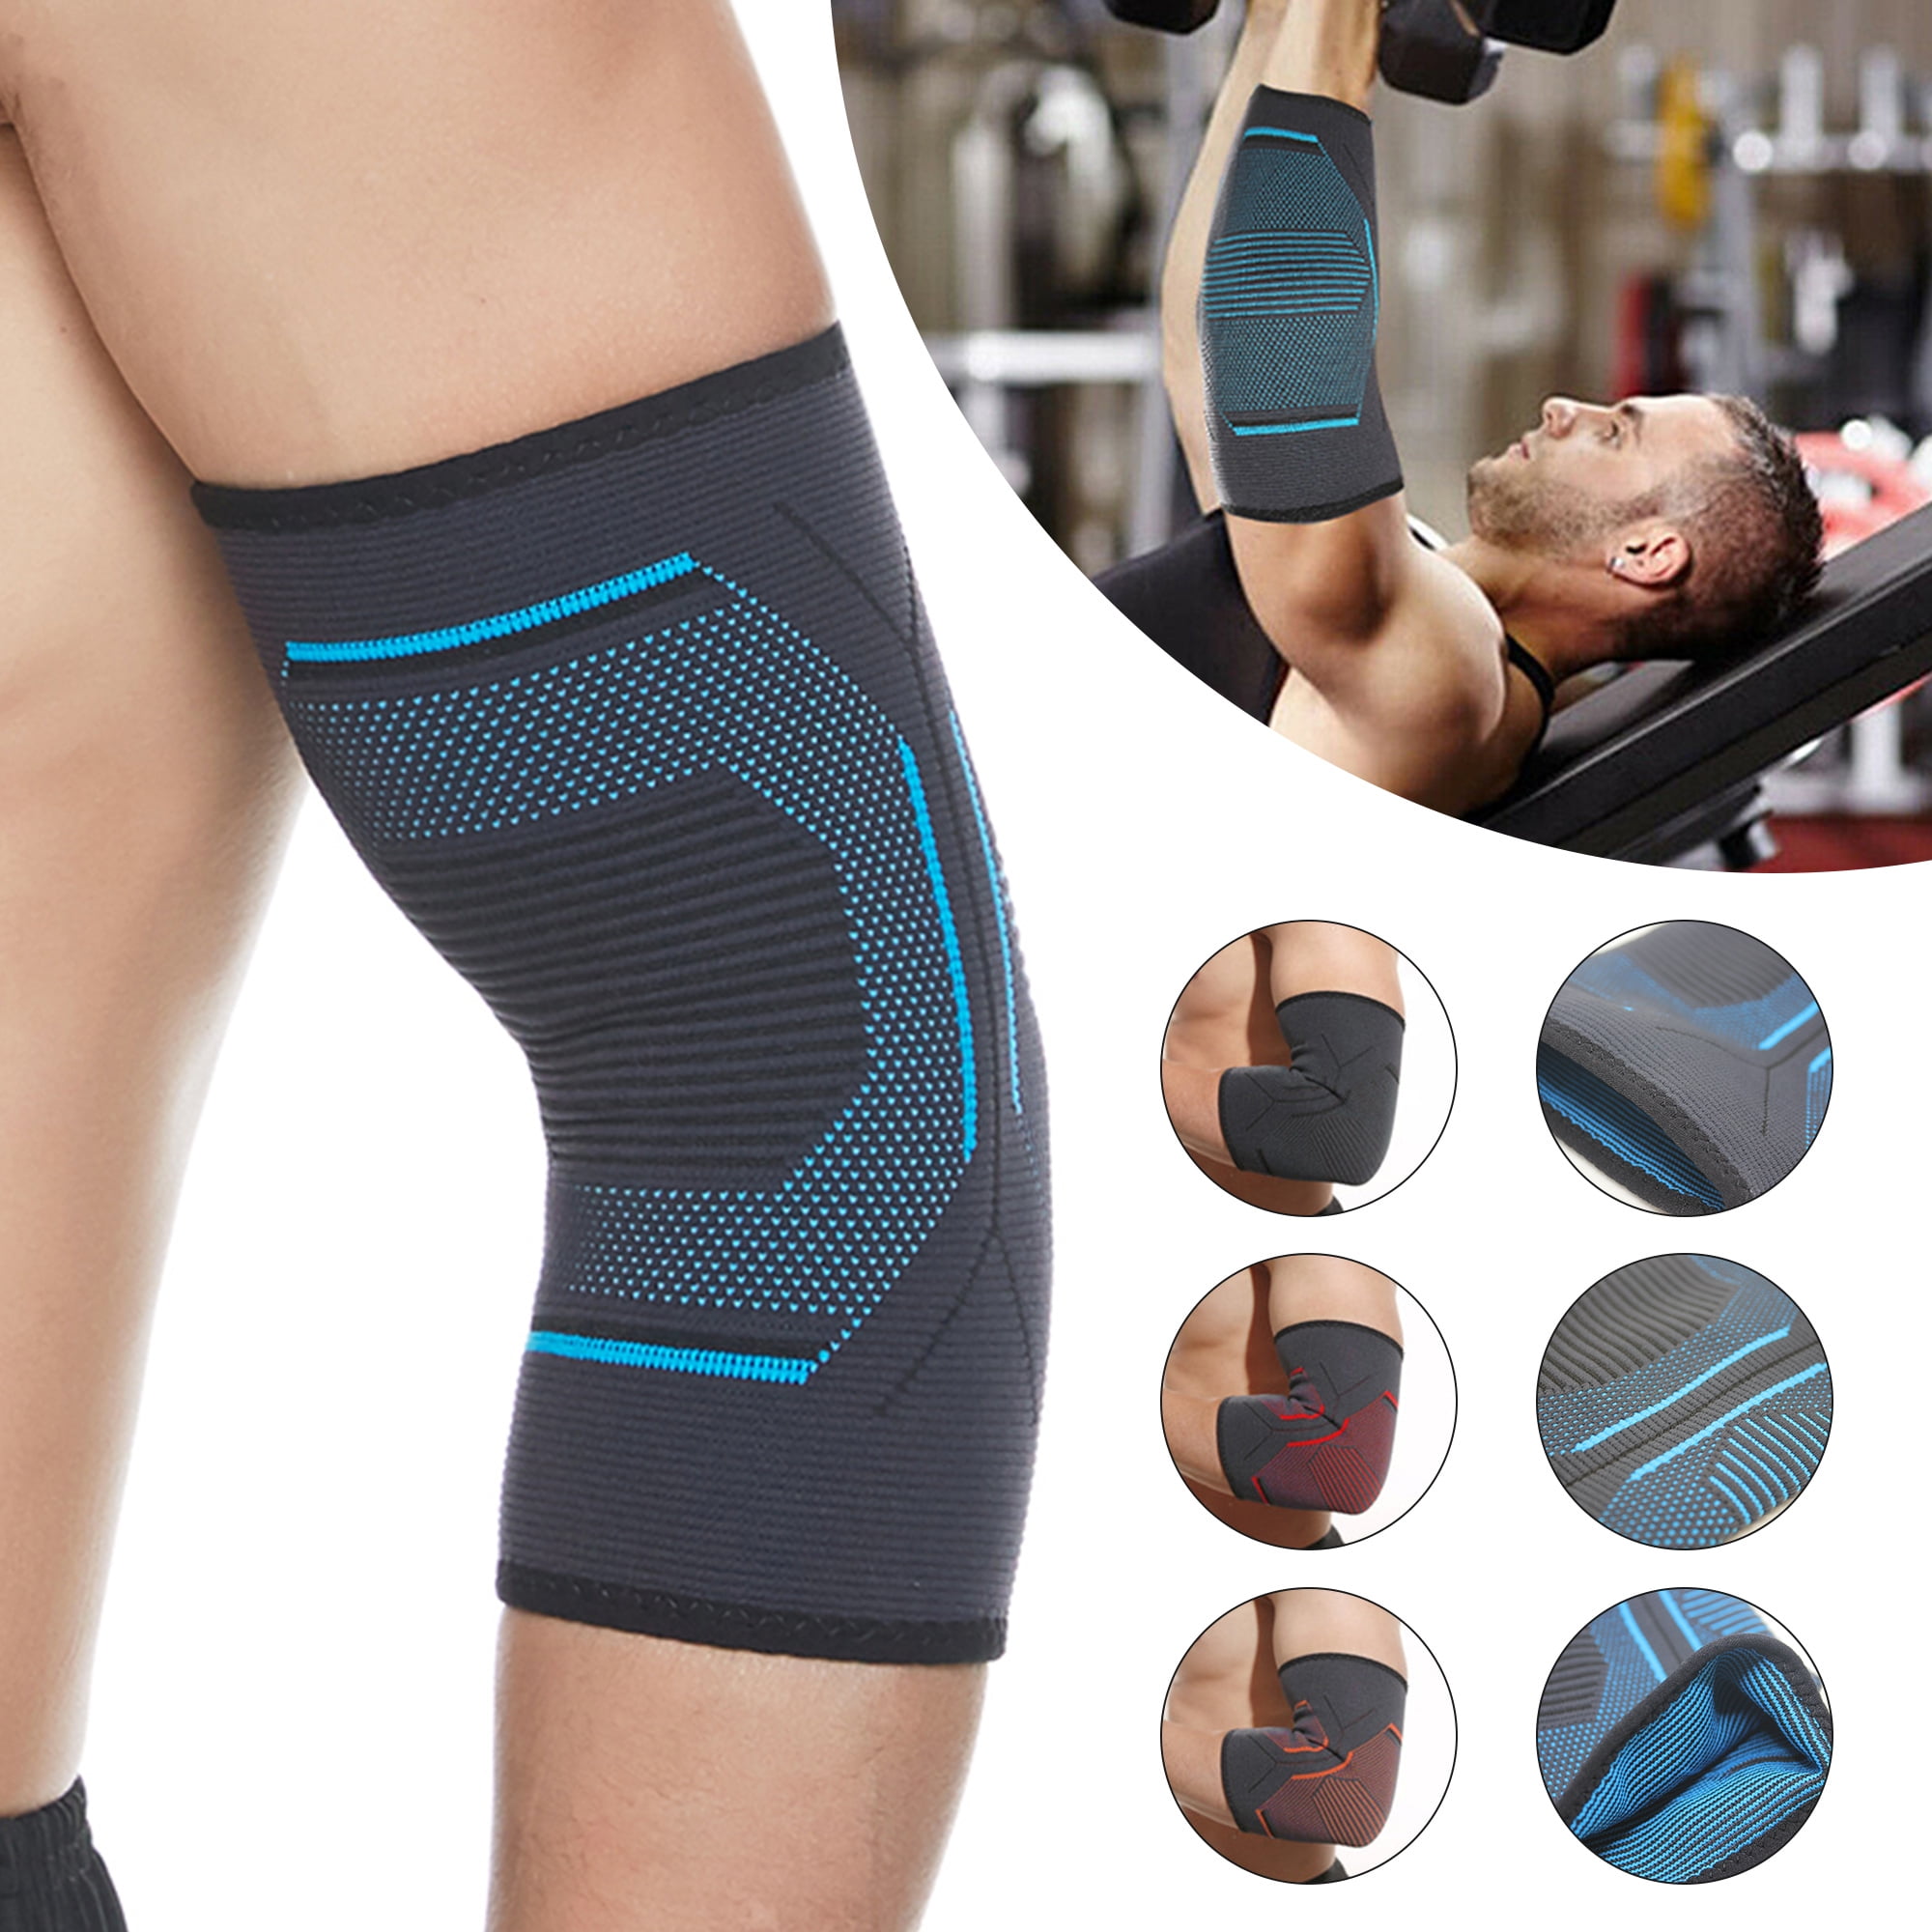 Elbow Support Sleeves Brace Work Tennis Training Weight Lifting Gym S/M L/XL 